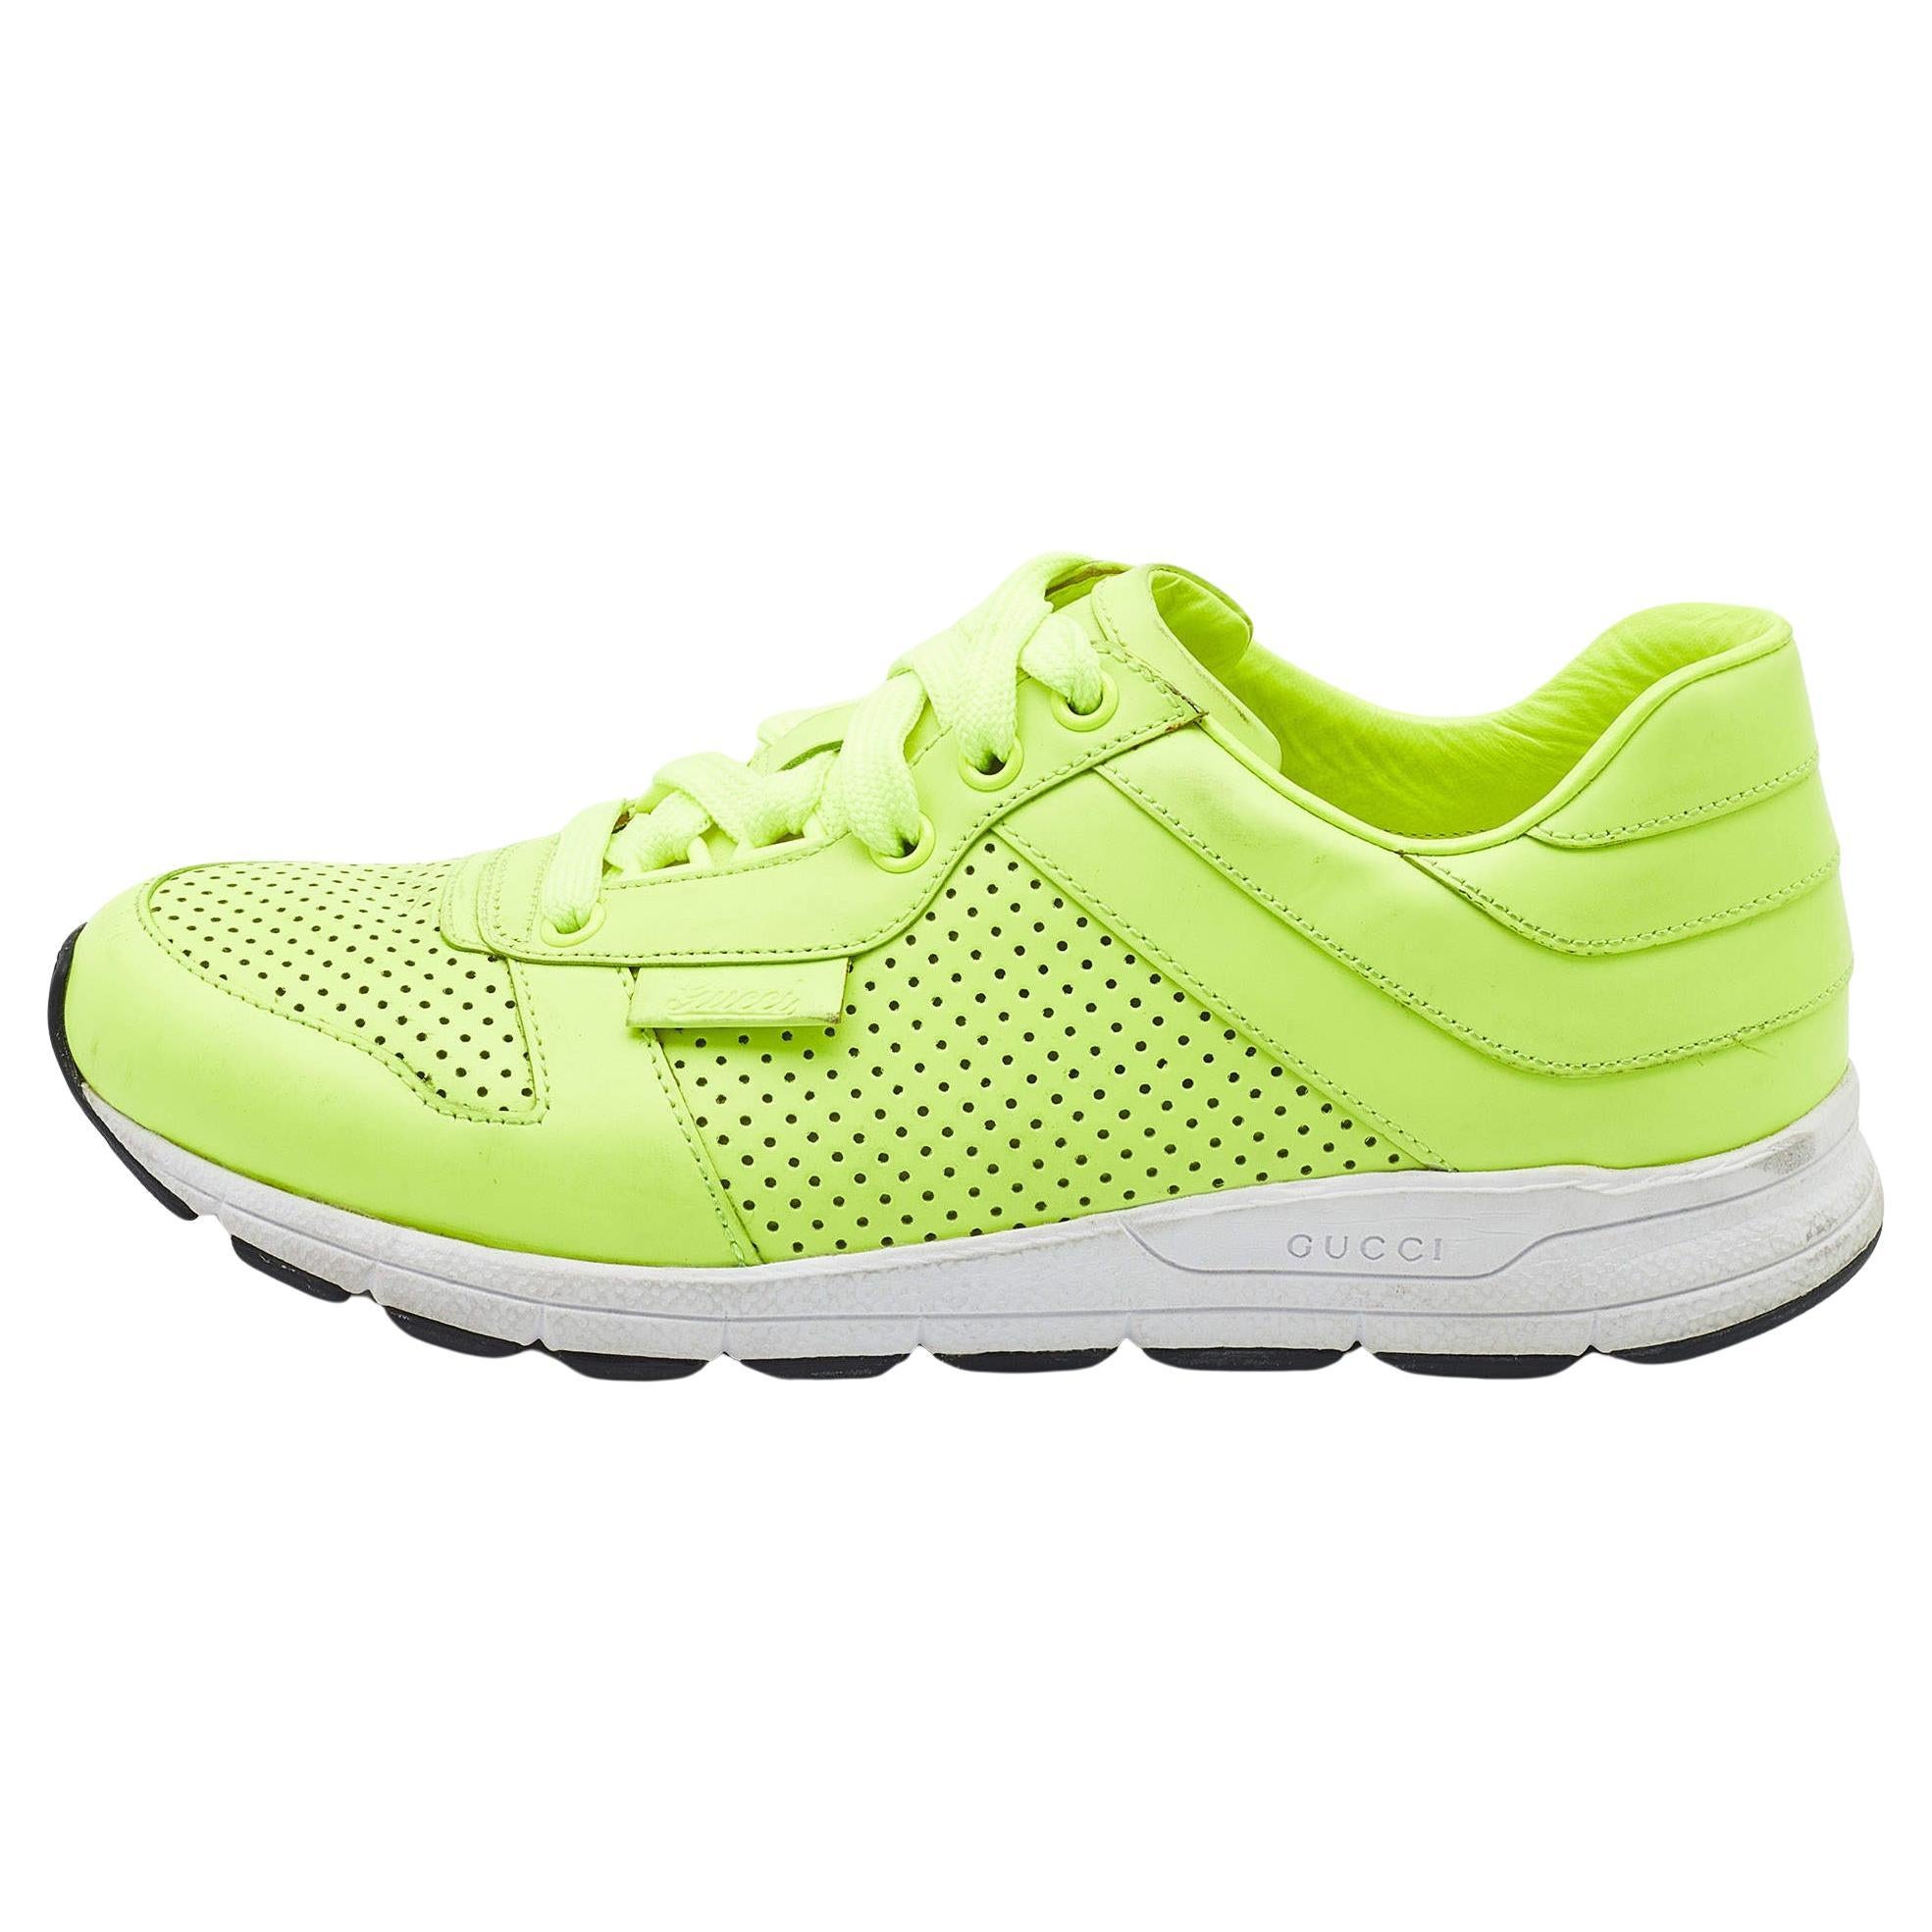 Gucci Neon Green Perforated Leather Lace Up Sneakers Size 38 For Sale